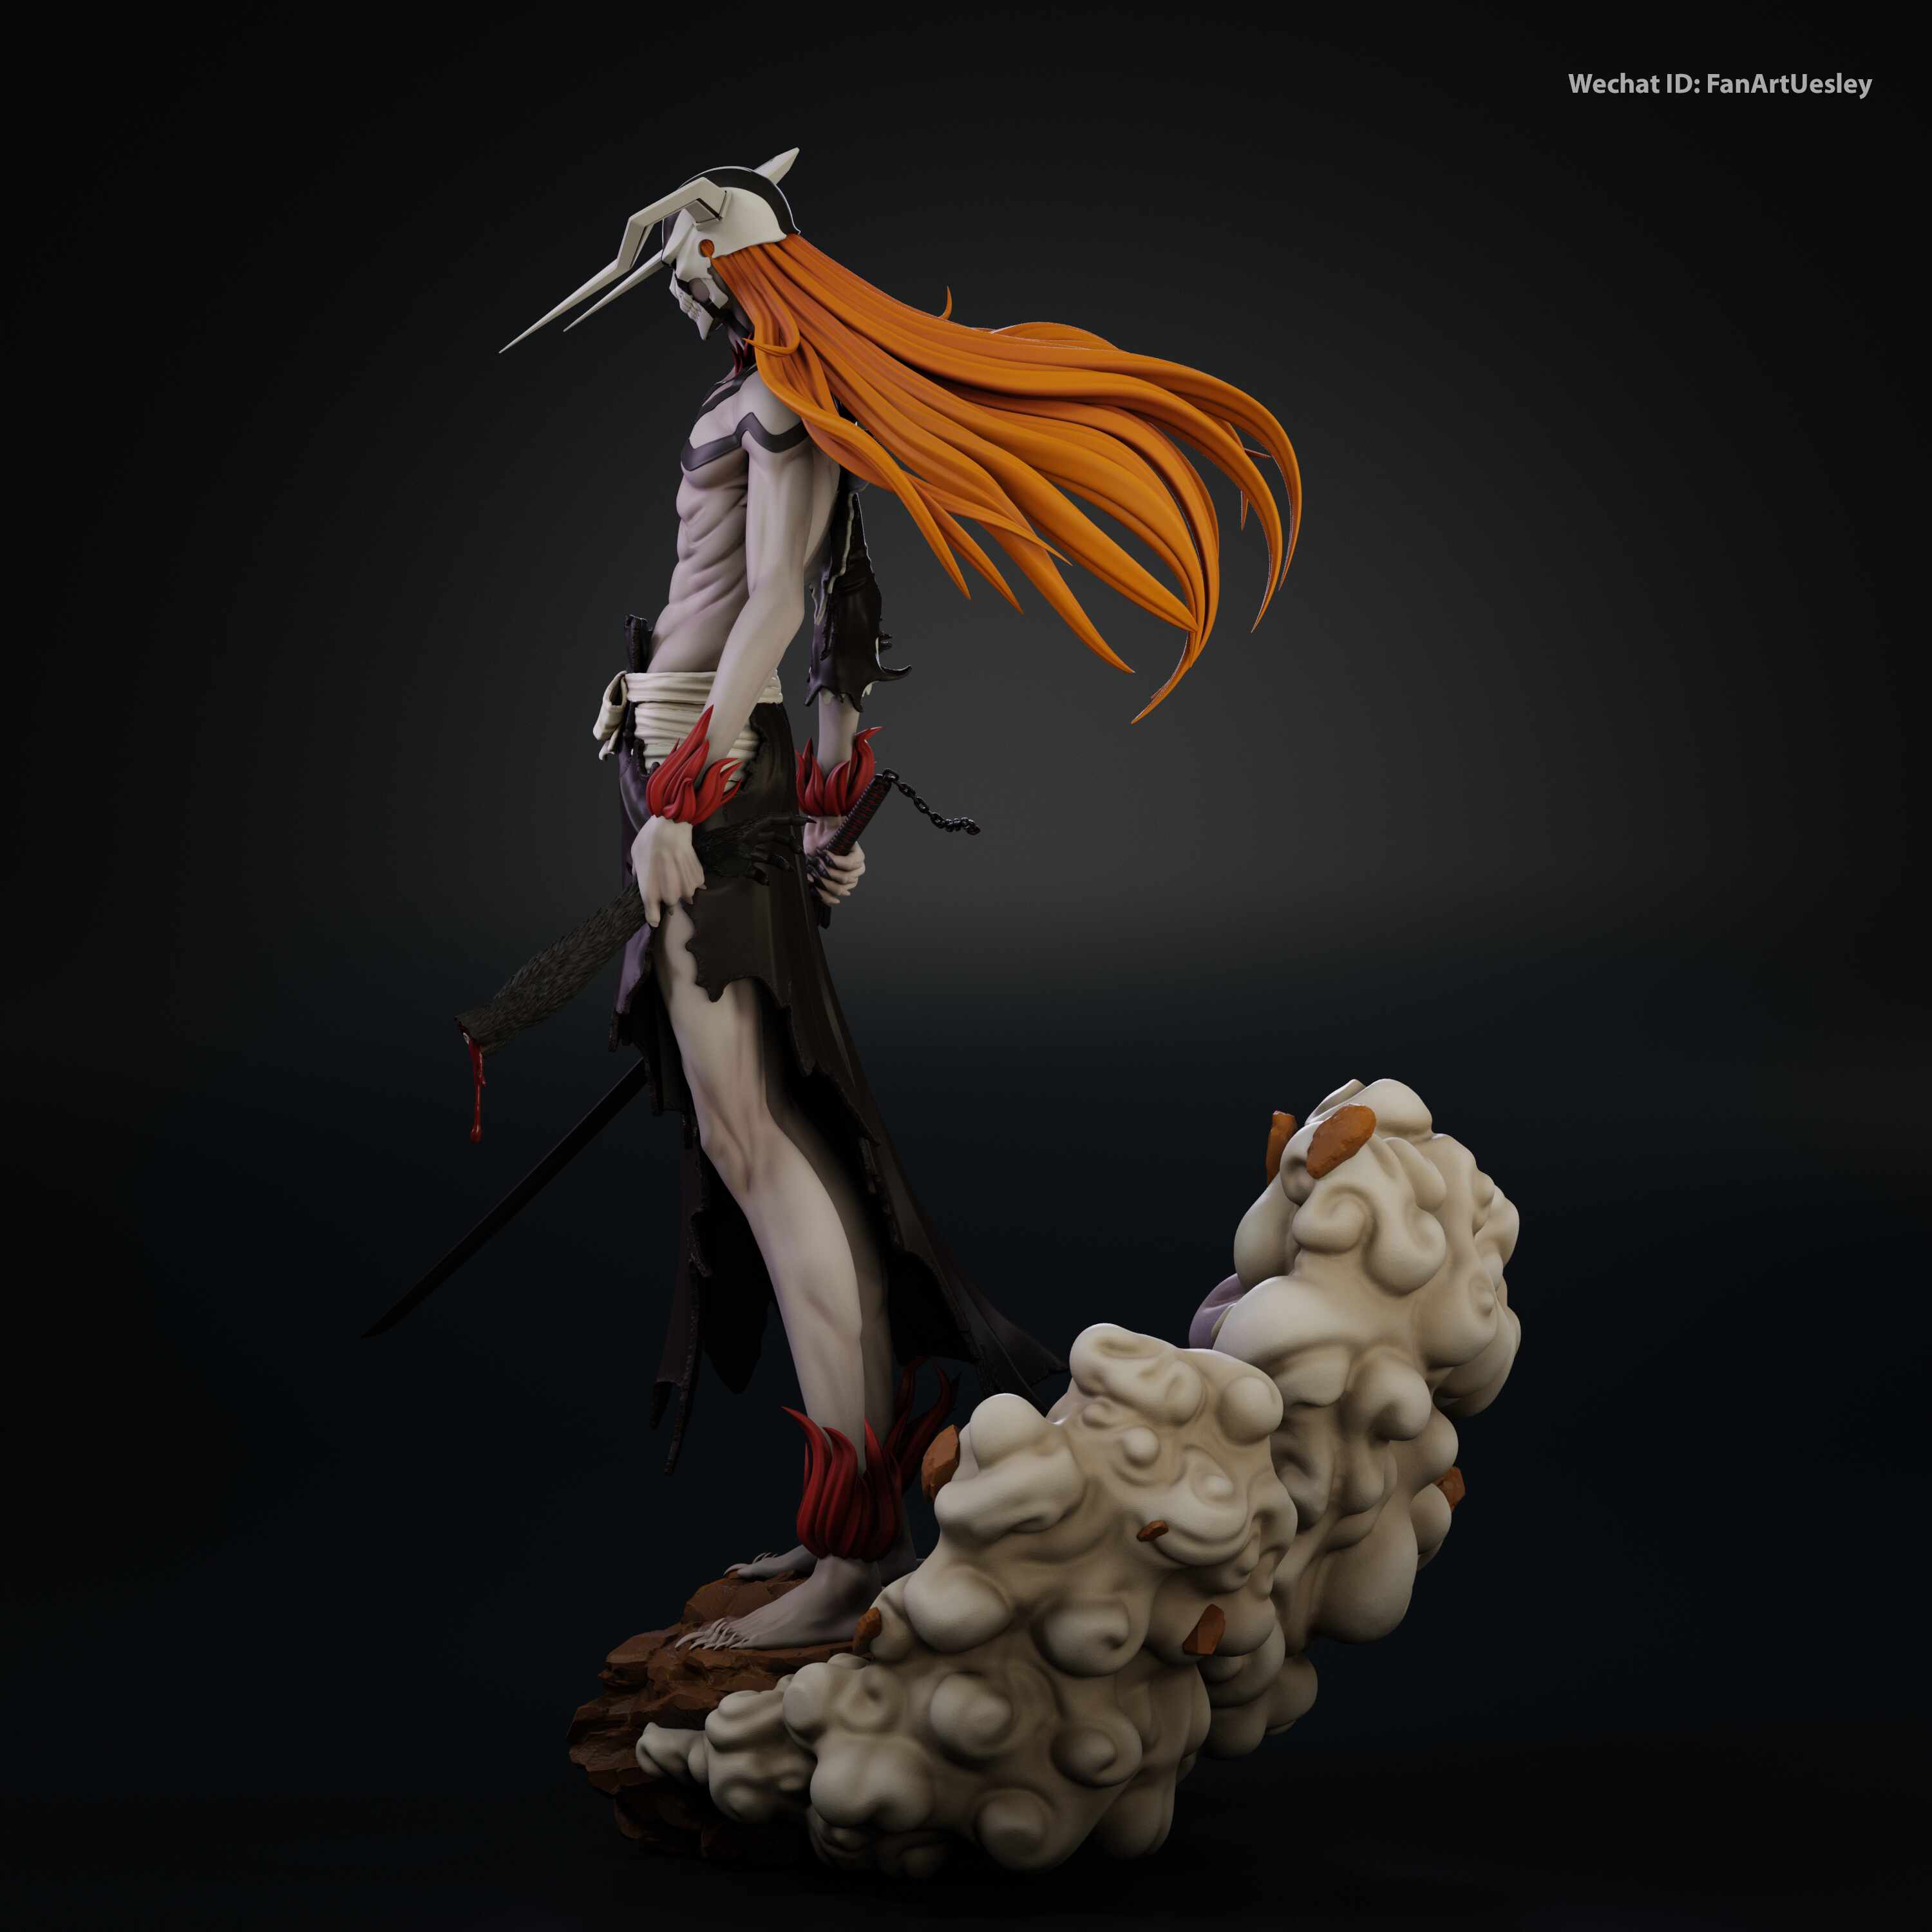 Vasto Lorde Art Board Print for Sale by Anime--Life